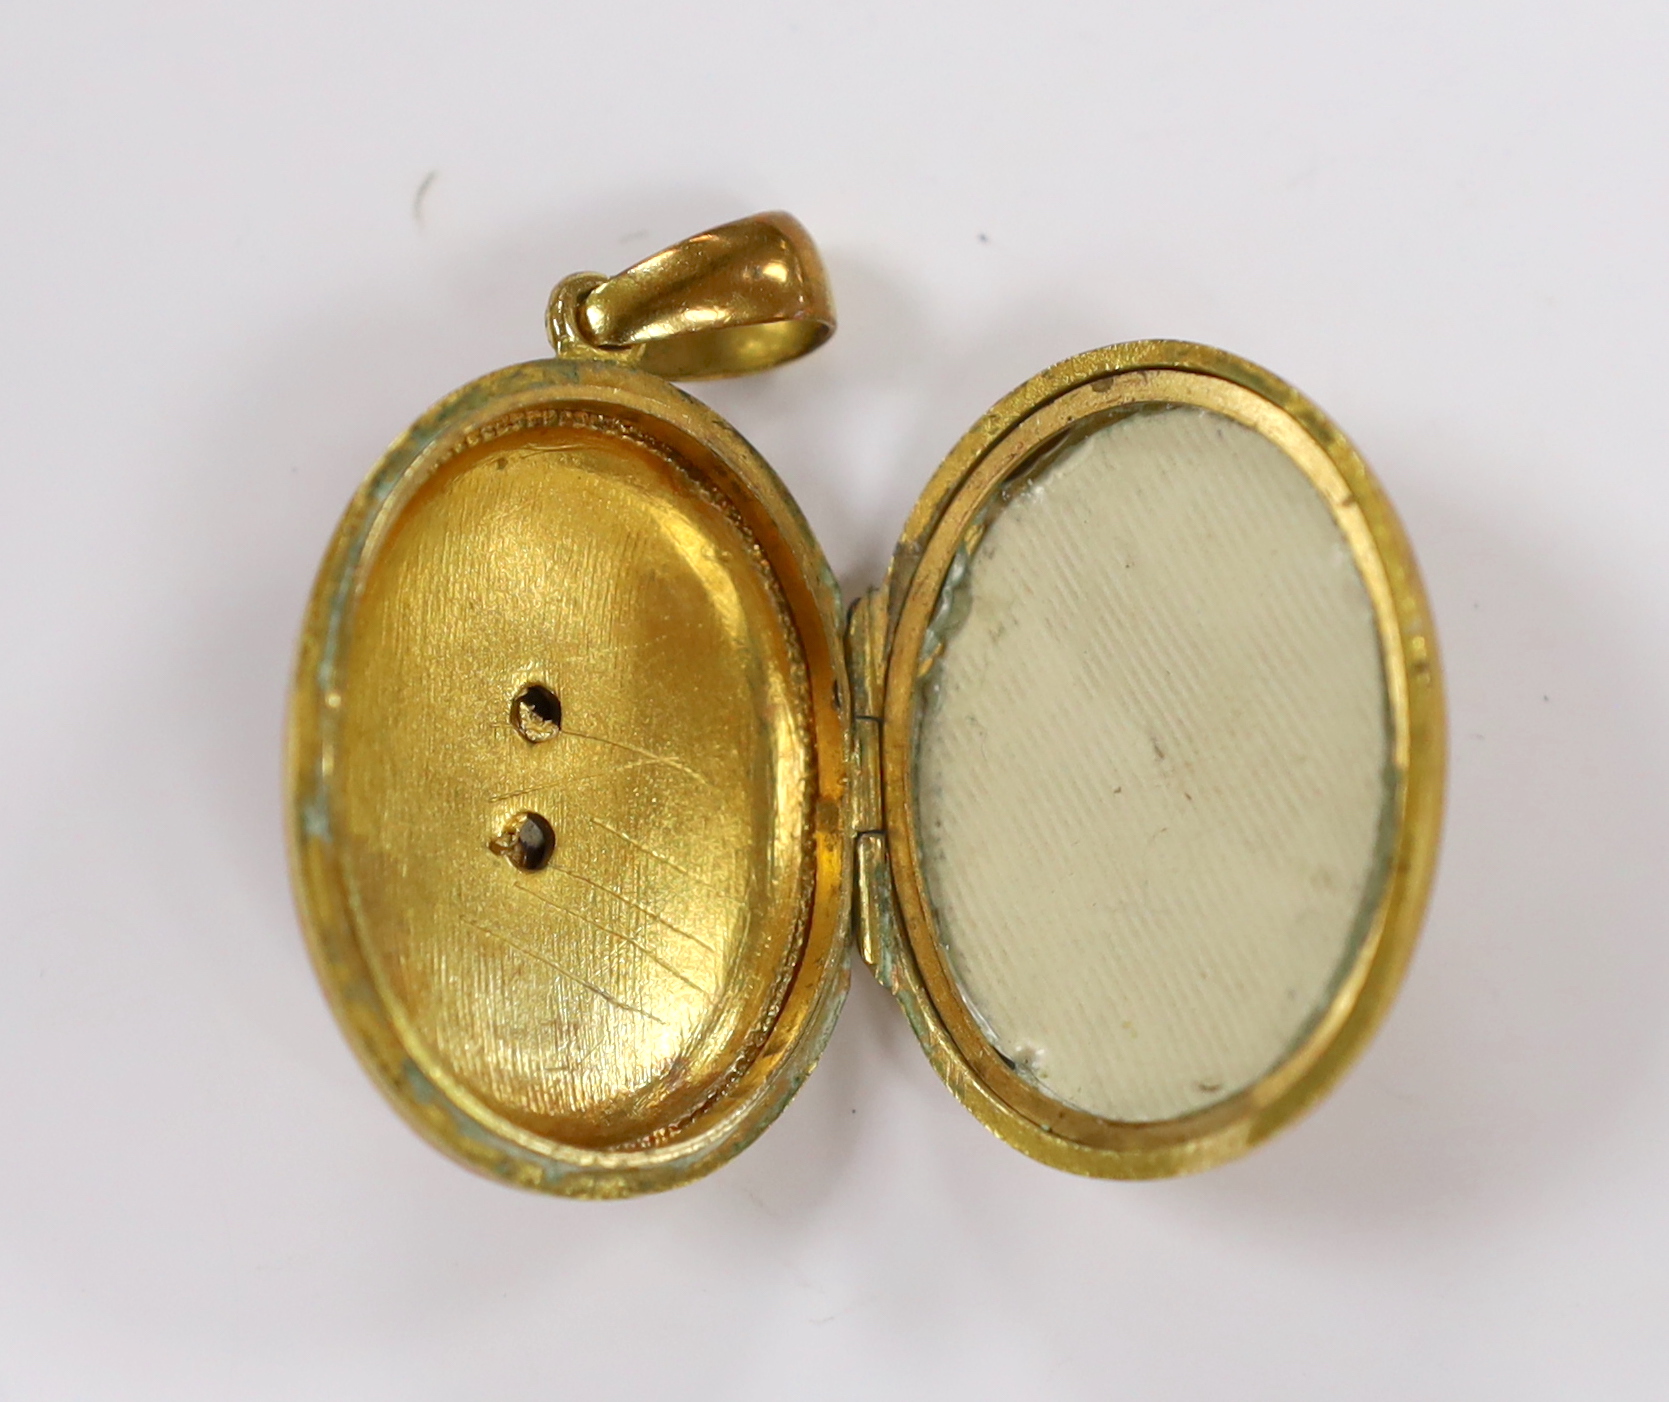 An early 20th century gilt metal and blue enamel set oval locket, with floral motif, overall 48mm, gross weight 17.3 grams.